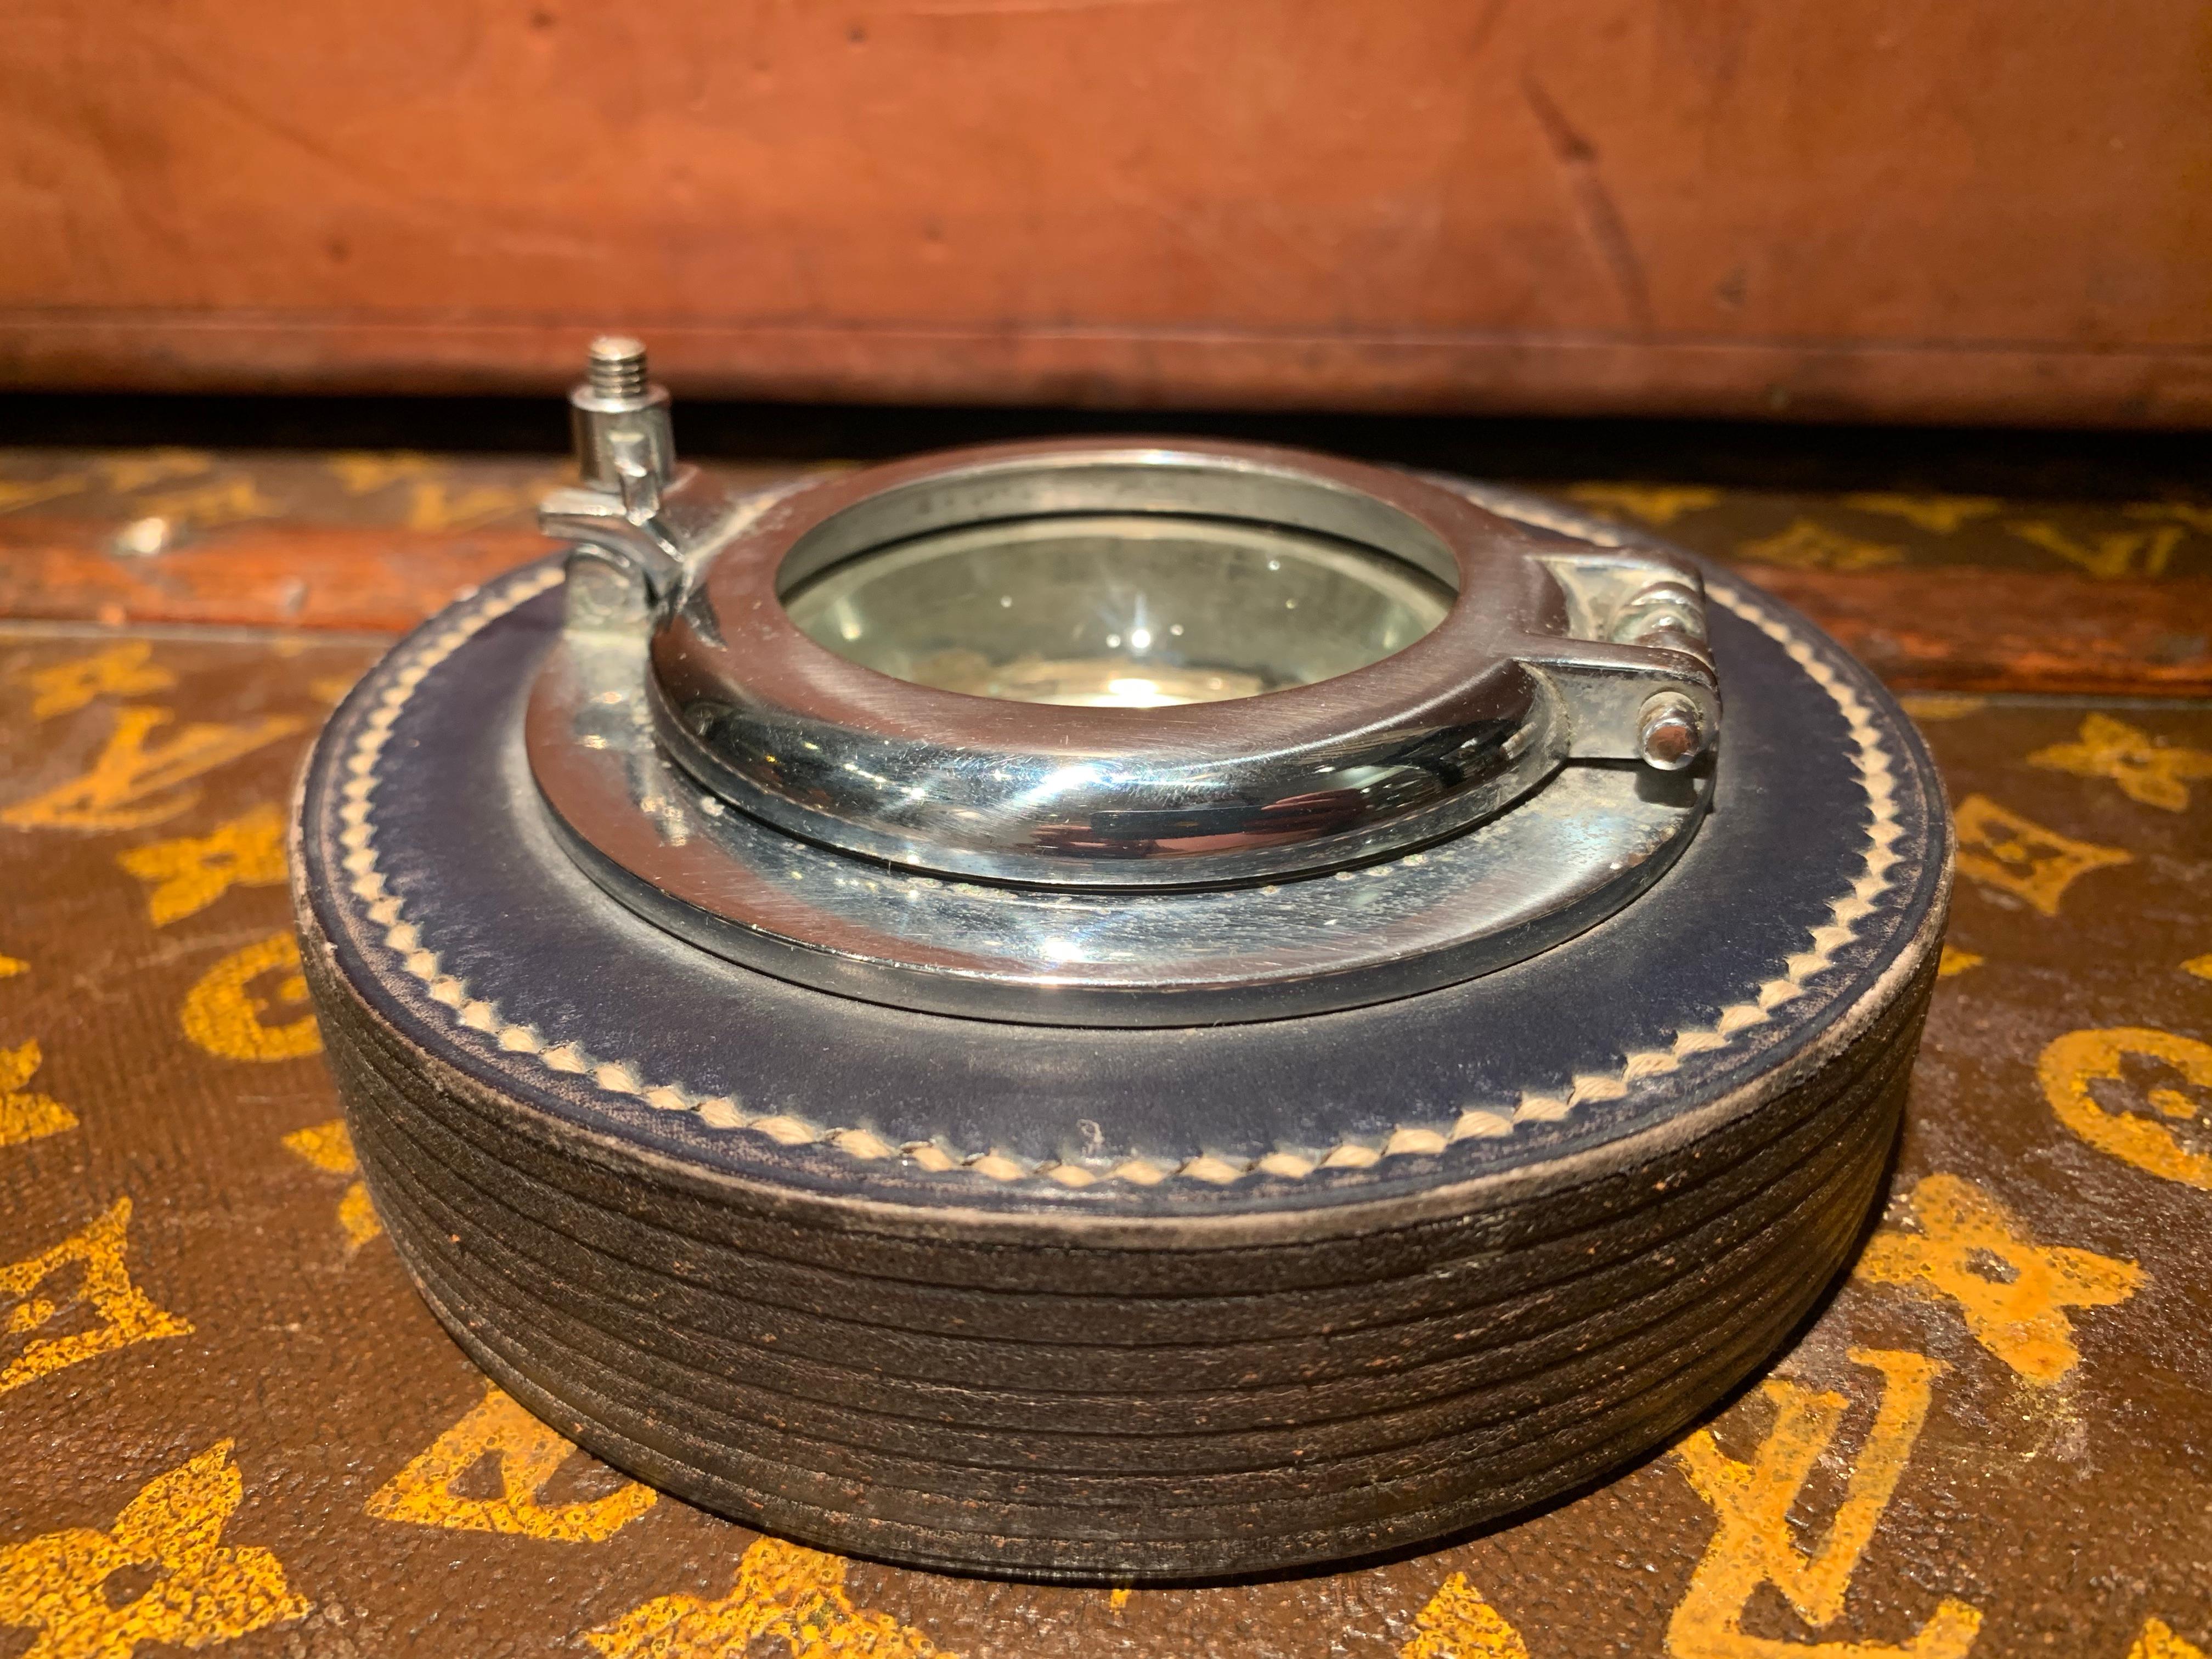 Rare 1950s Hermès ashtray in the shape of a small porthole, designed by Paul Dupré-Lafon (1900-1971)
Stamped Hermès/ Paris underneath
Dark Blue/ Black leather
Condition:
The leather top is slightly damage on the top, the chrome porthole has some